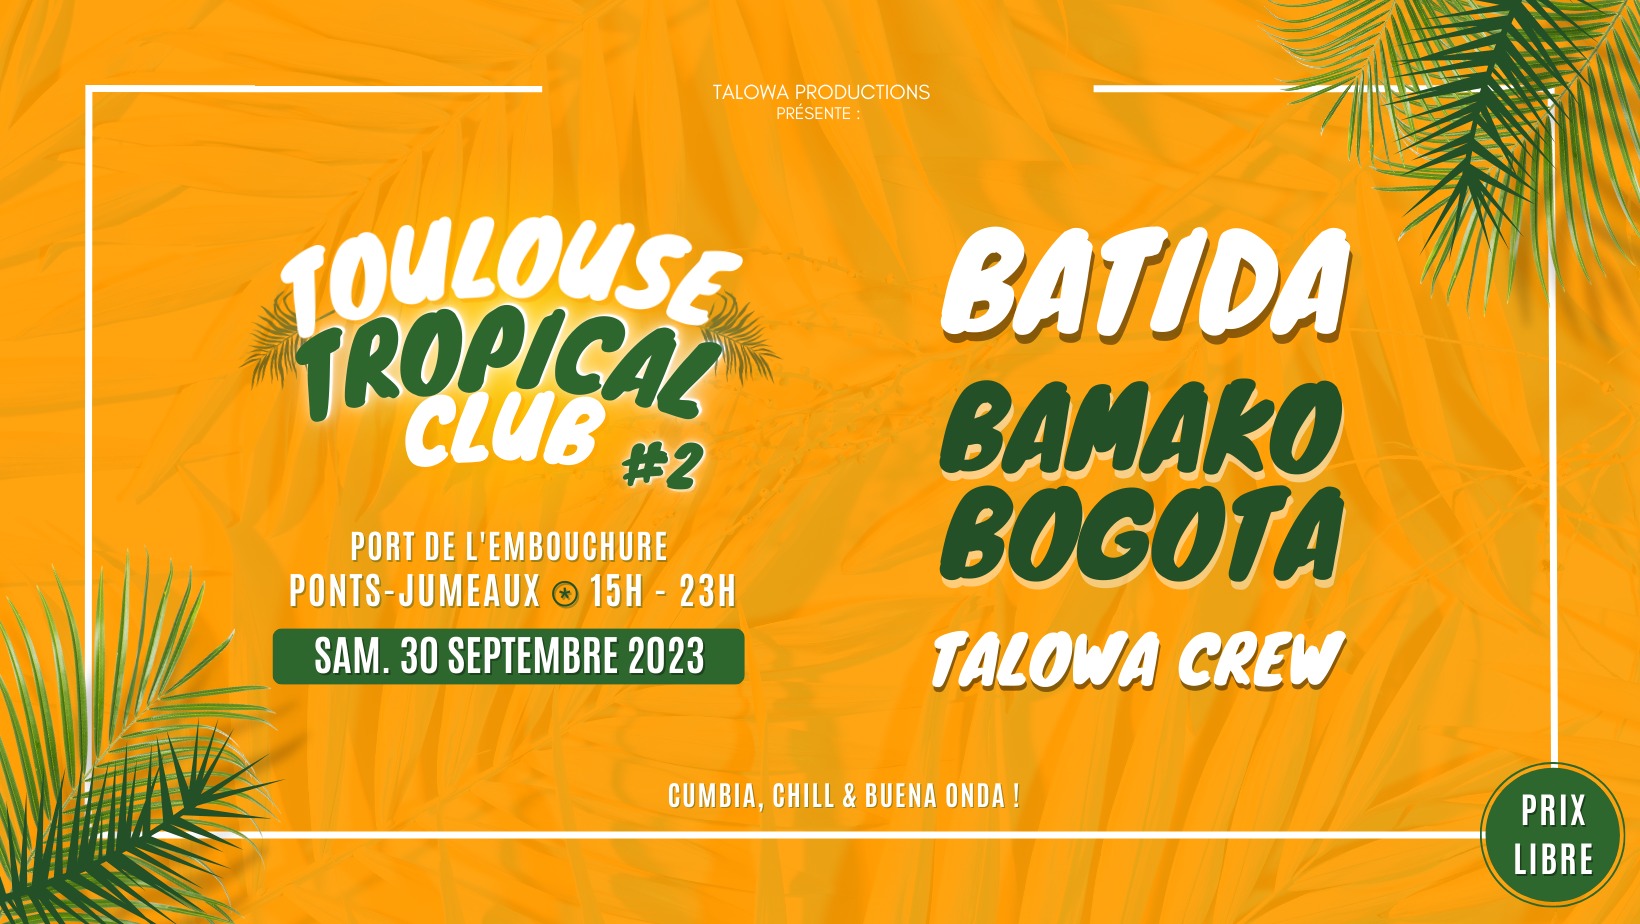 Toulouse Tropical Club